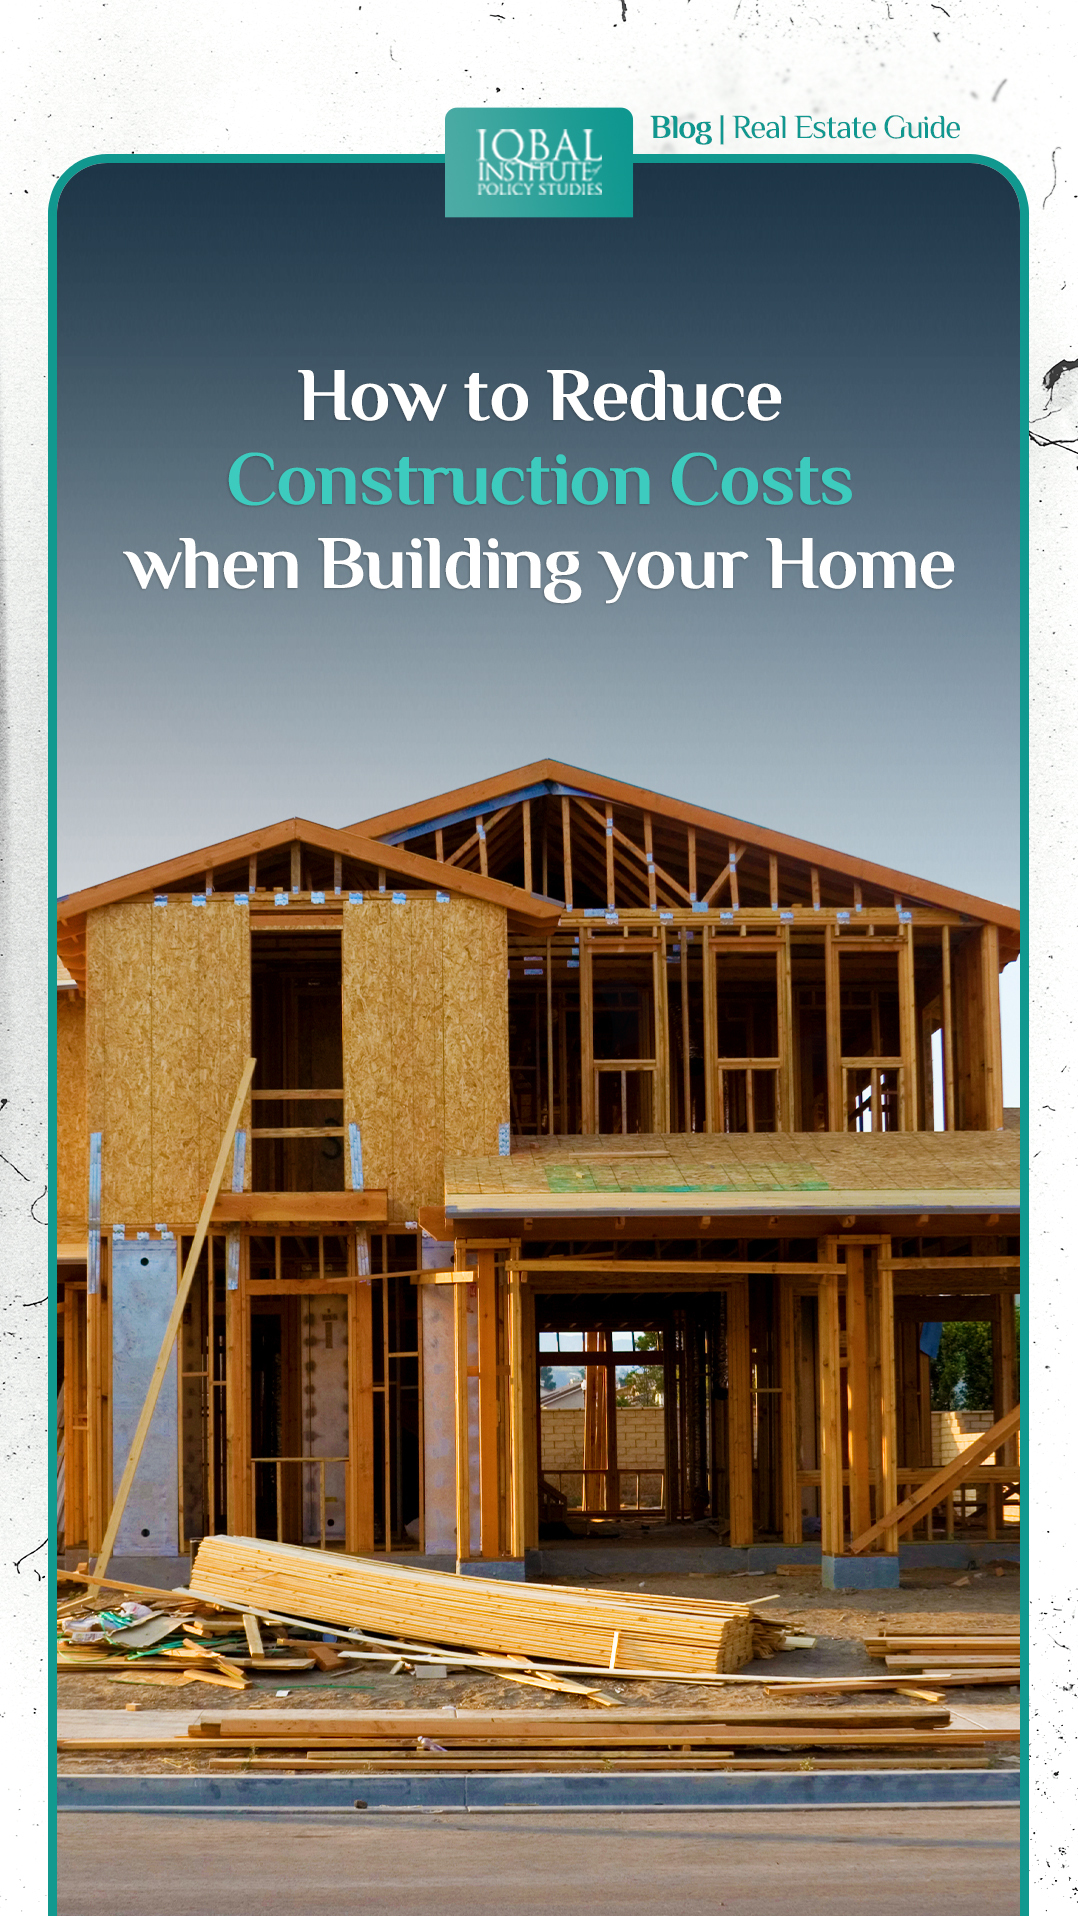 How to reduce construction costs when building your home